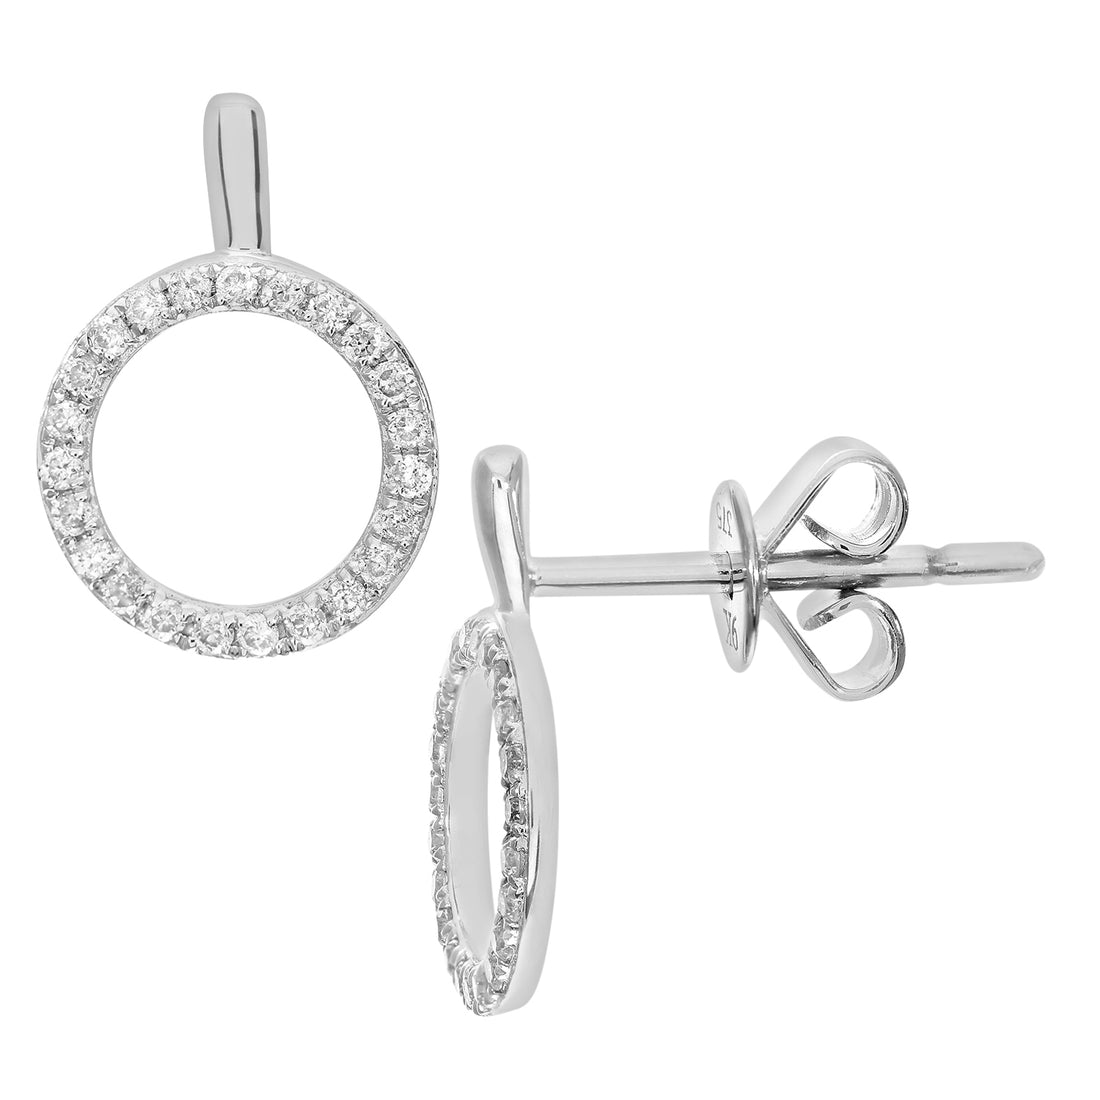 9ct White Gold 0.15ct Pave Set Diamond Open Ring Earrings